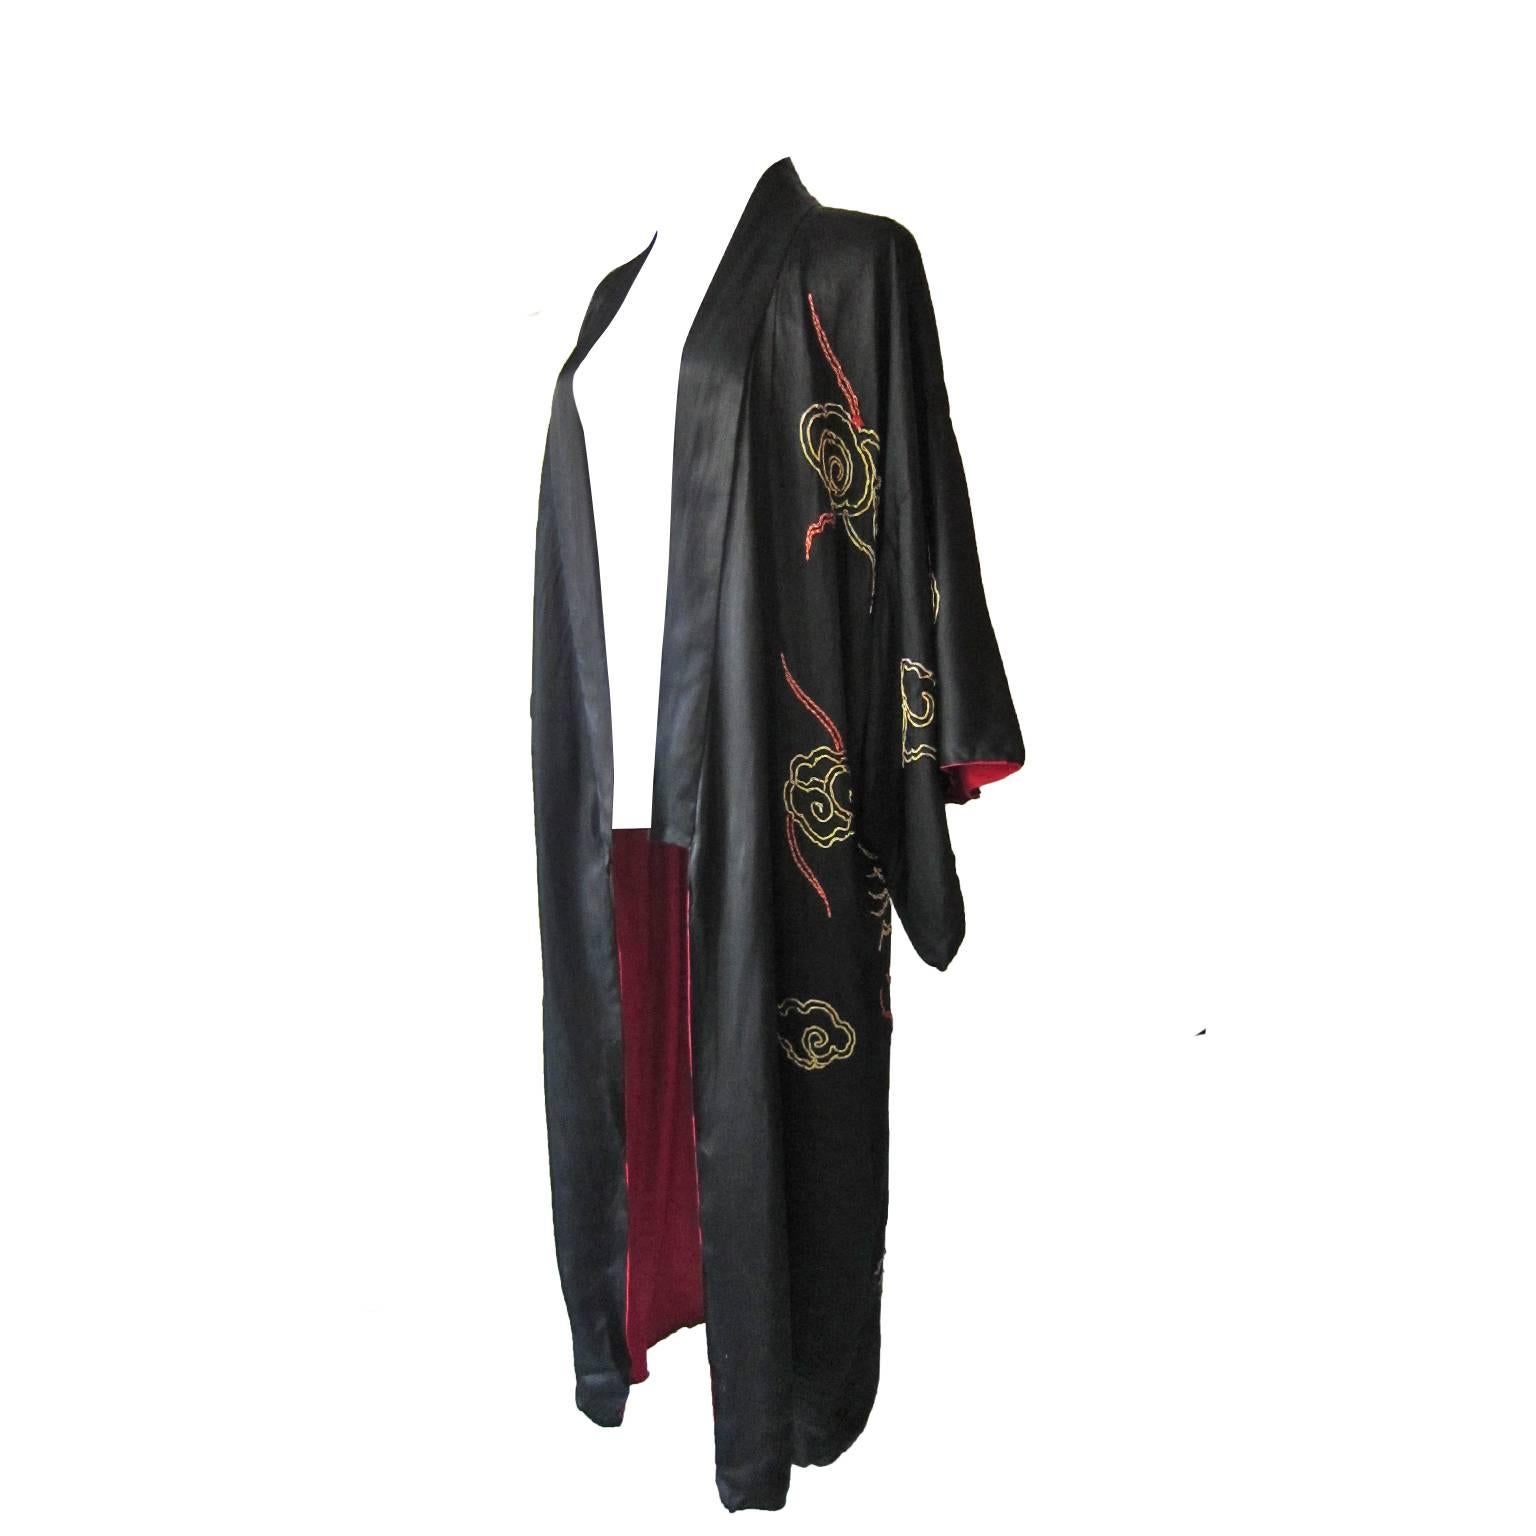 Black satin kimono style robe featuring dramatic gold embroidery from circa 1940s. 
Futures two large dragons flying among the clouds over Fuji mountain, beautifully embroidered with thick metallic gold chord. With contrasted bright red lining.